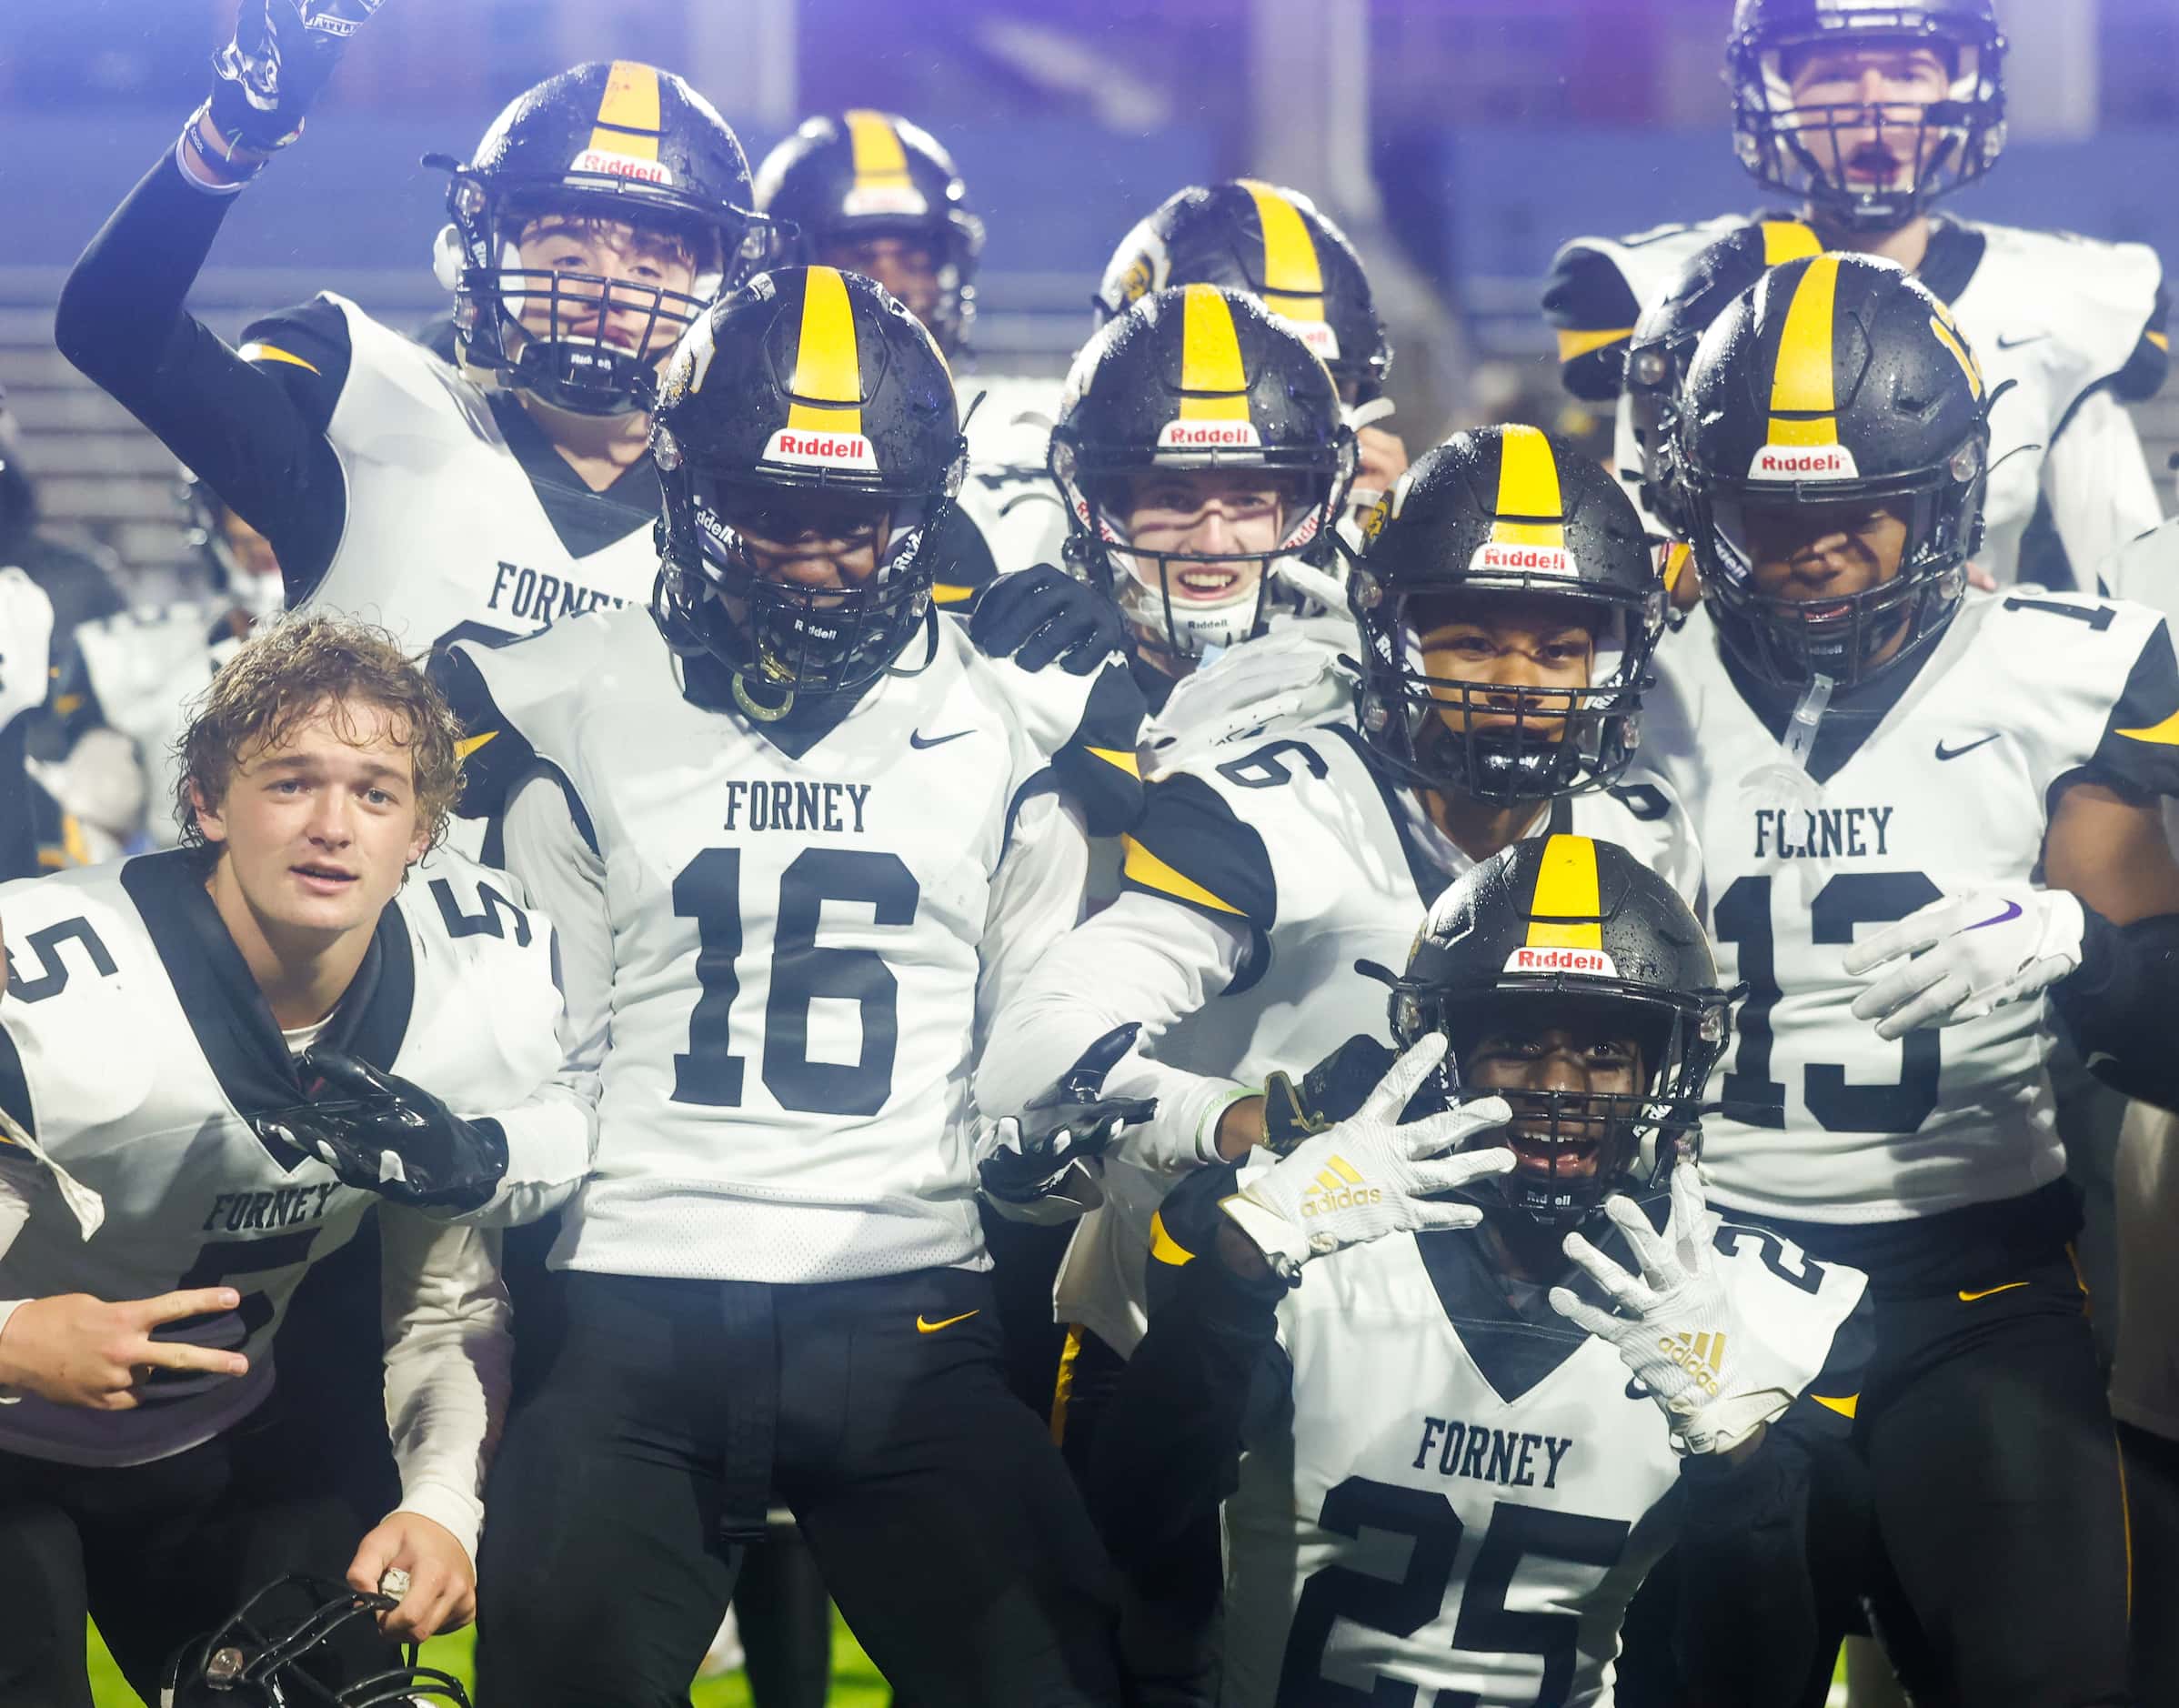 Forney players pose for a photo after their win against McKinney North at the McKinney ISD...